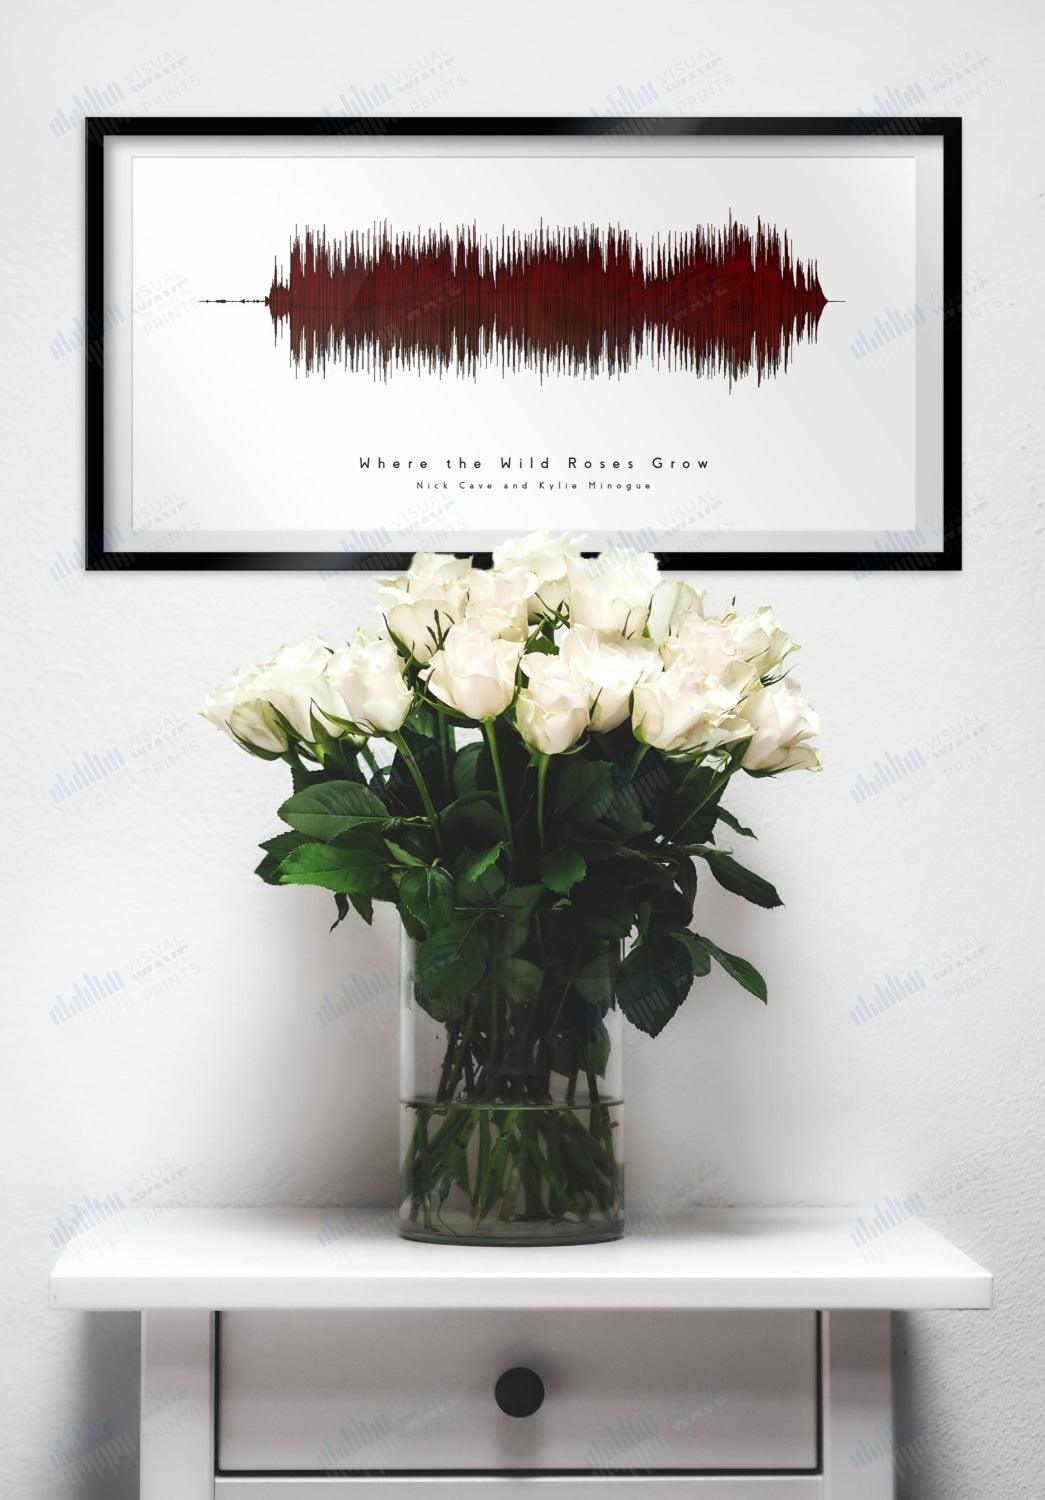 Where the Wild Roses Grow by Nick Cave and Kylie Minogue - Visual Wave Prints